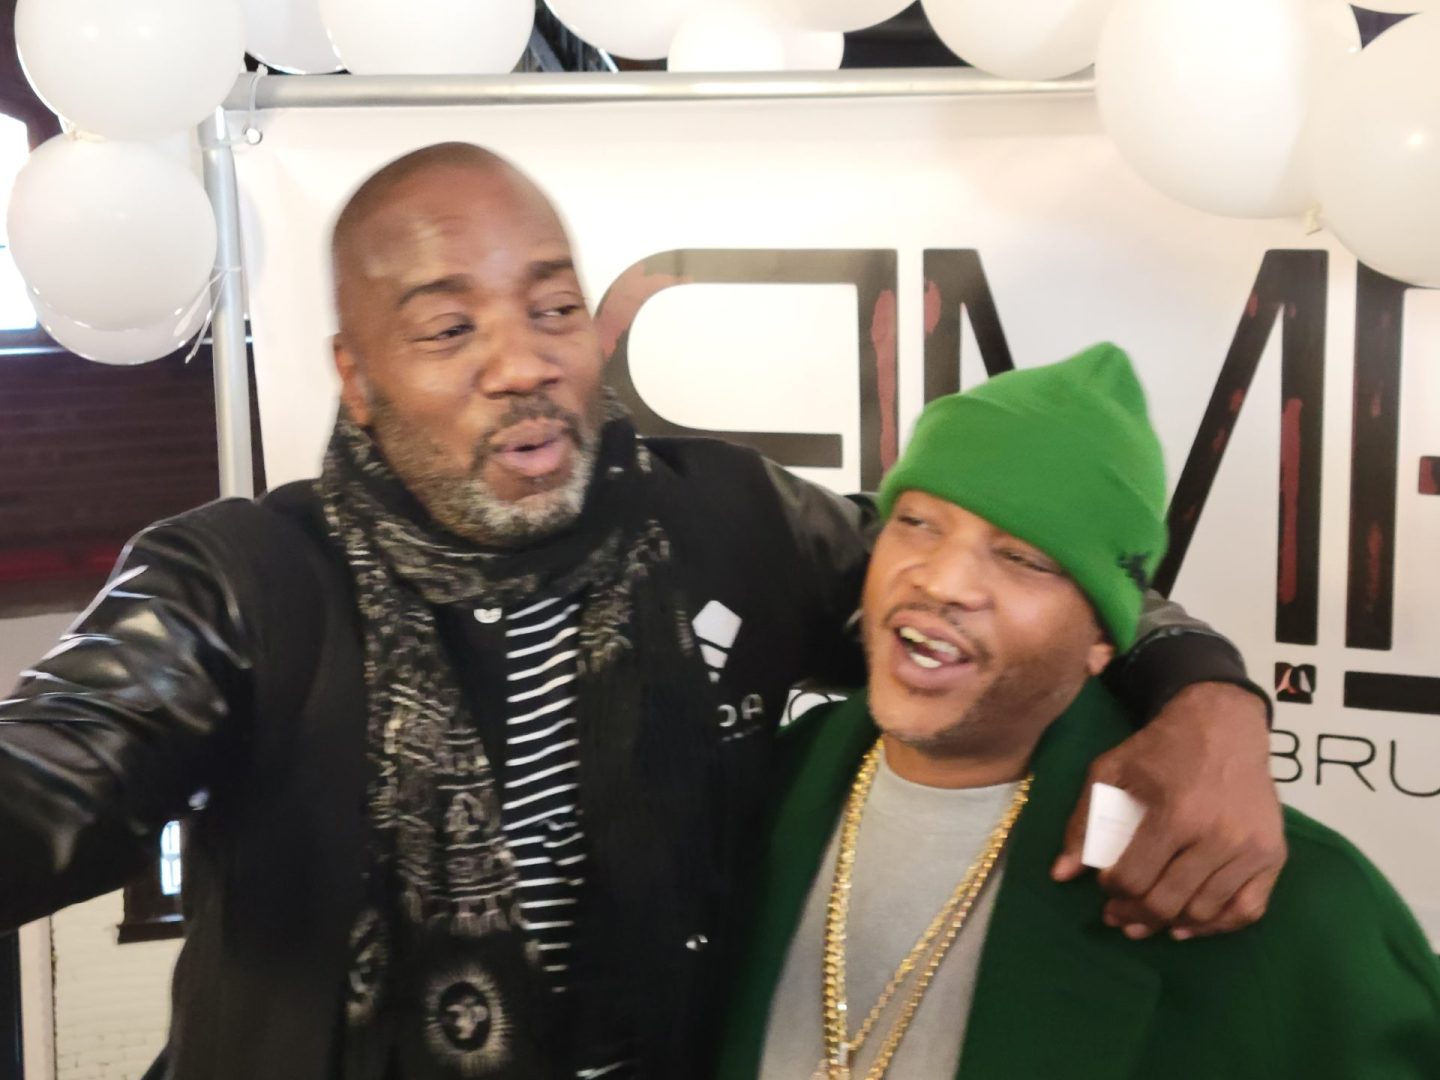 Actor Malik Yoba and hip-hop artist Styles P share a laugh in Brooklyn (Photo by Derrel Jazz Johnson for rolling out)